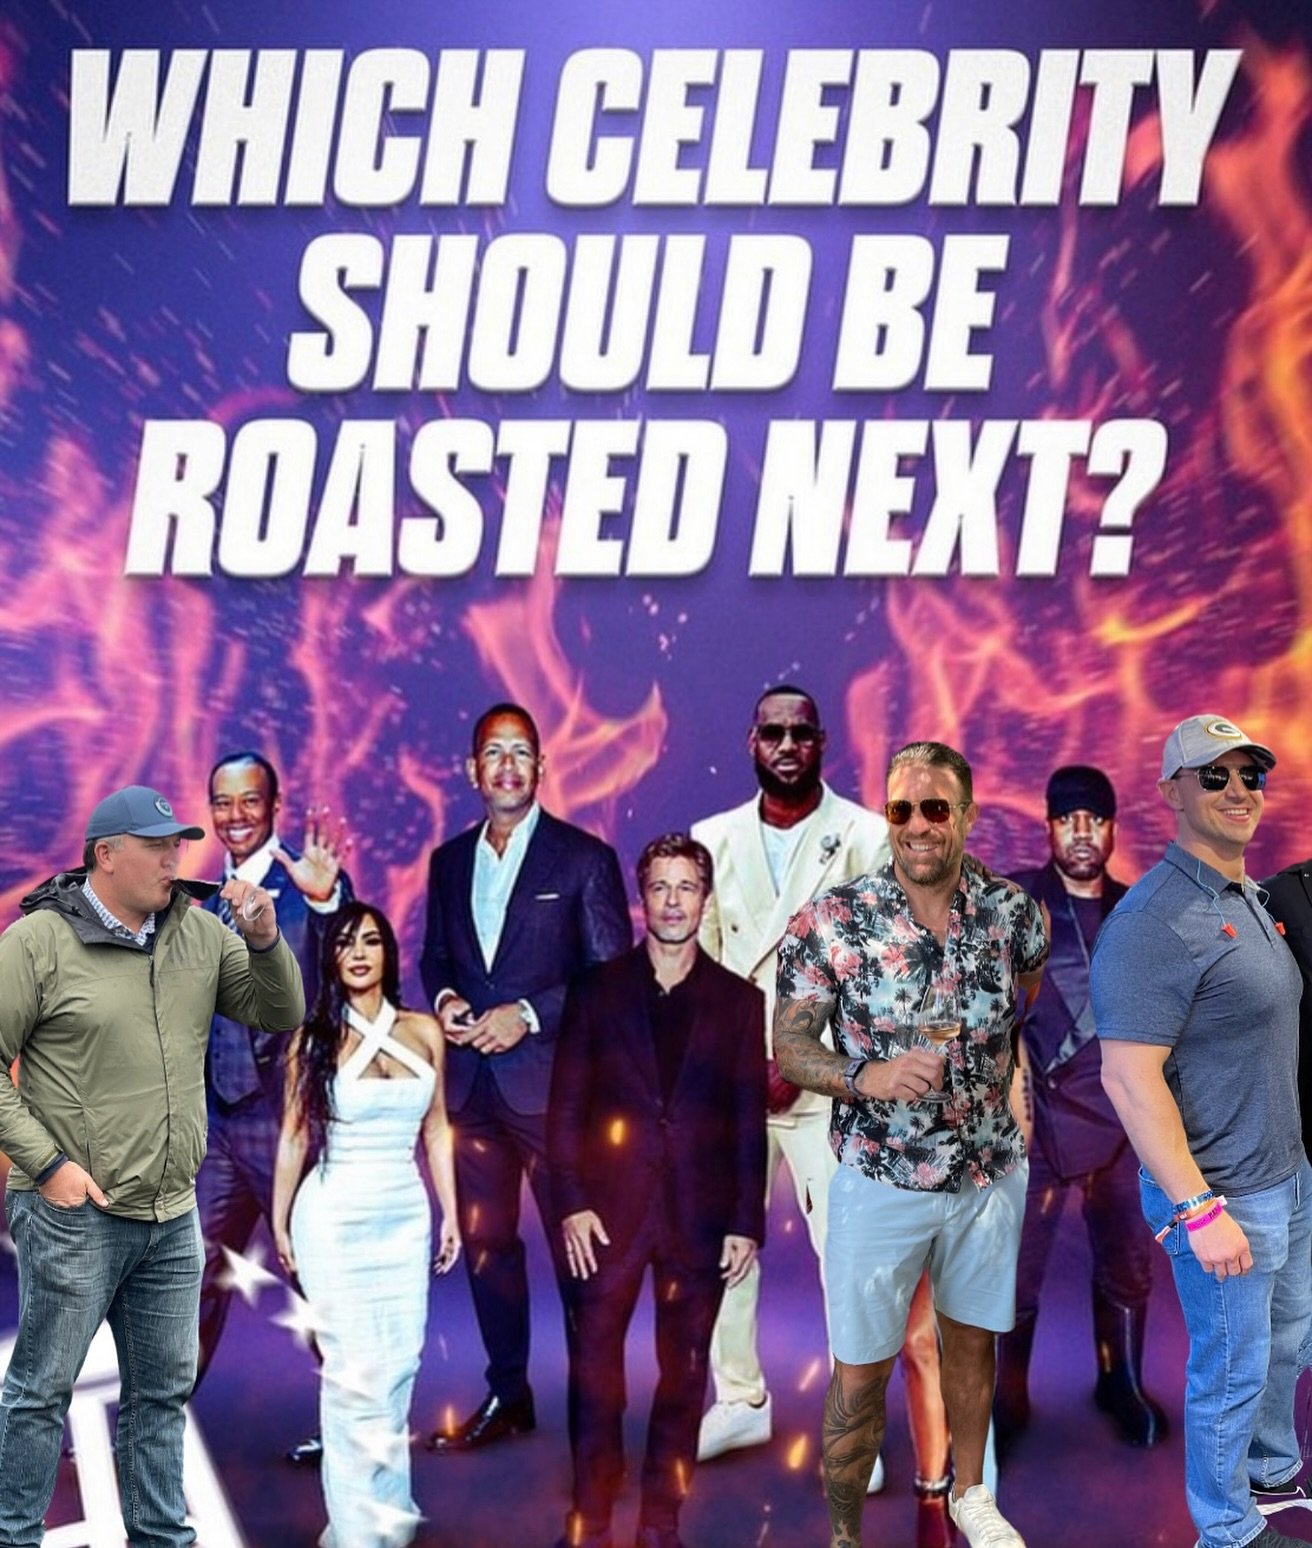 Who should the next celebrity roast be with? We&rsquo;ve got three good ideas&hellip; 😉😜🤣